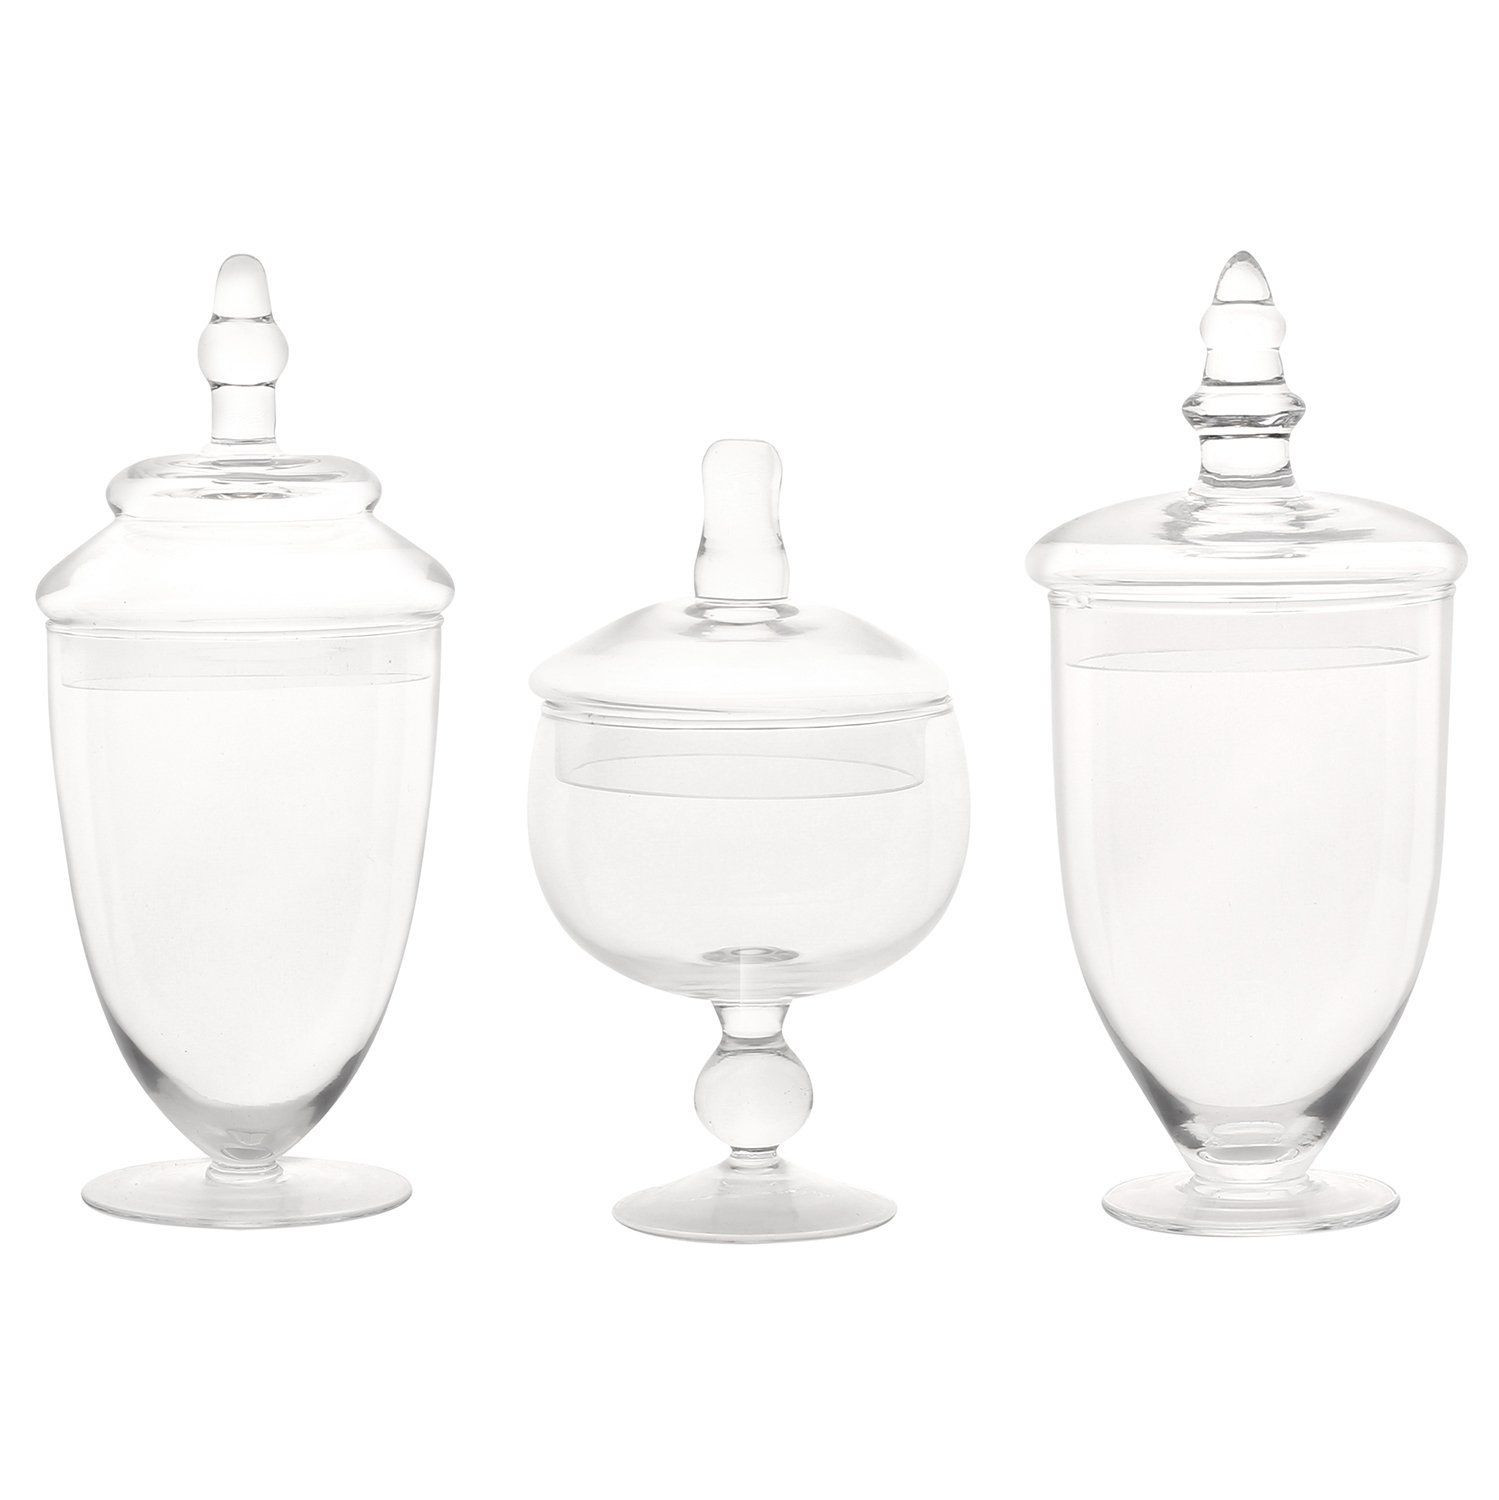 13 attractive Clear Glass Vases at Hobby Lobby 2024 free download clear glass vases at hobby lobby of amazon com mantello decor glass apothecary jars clear small set inside amazon com mantello decor glass apothecary jars clear small set of